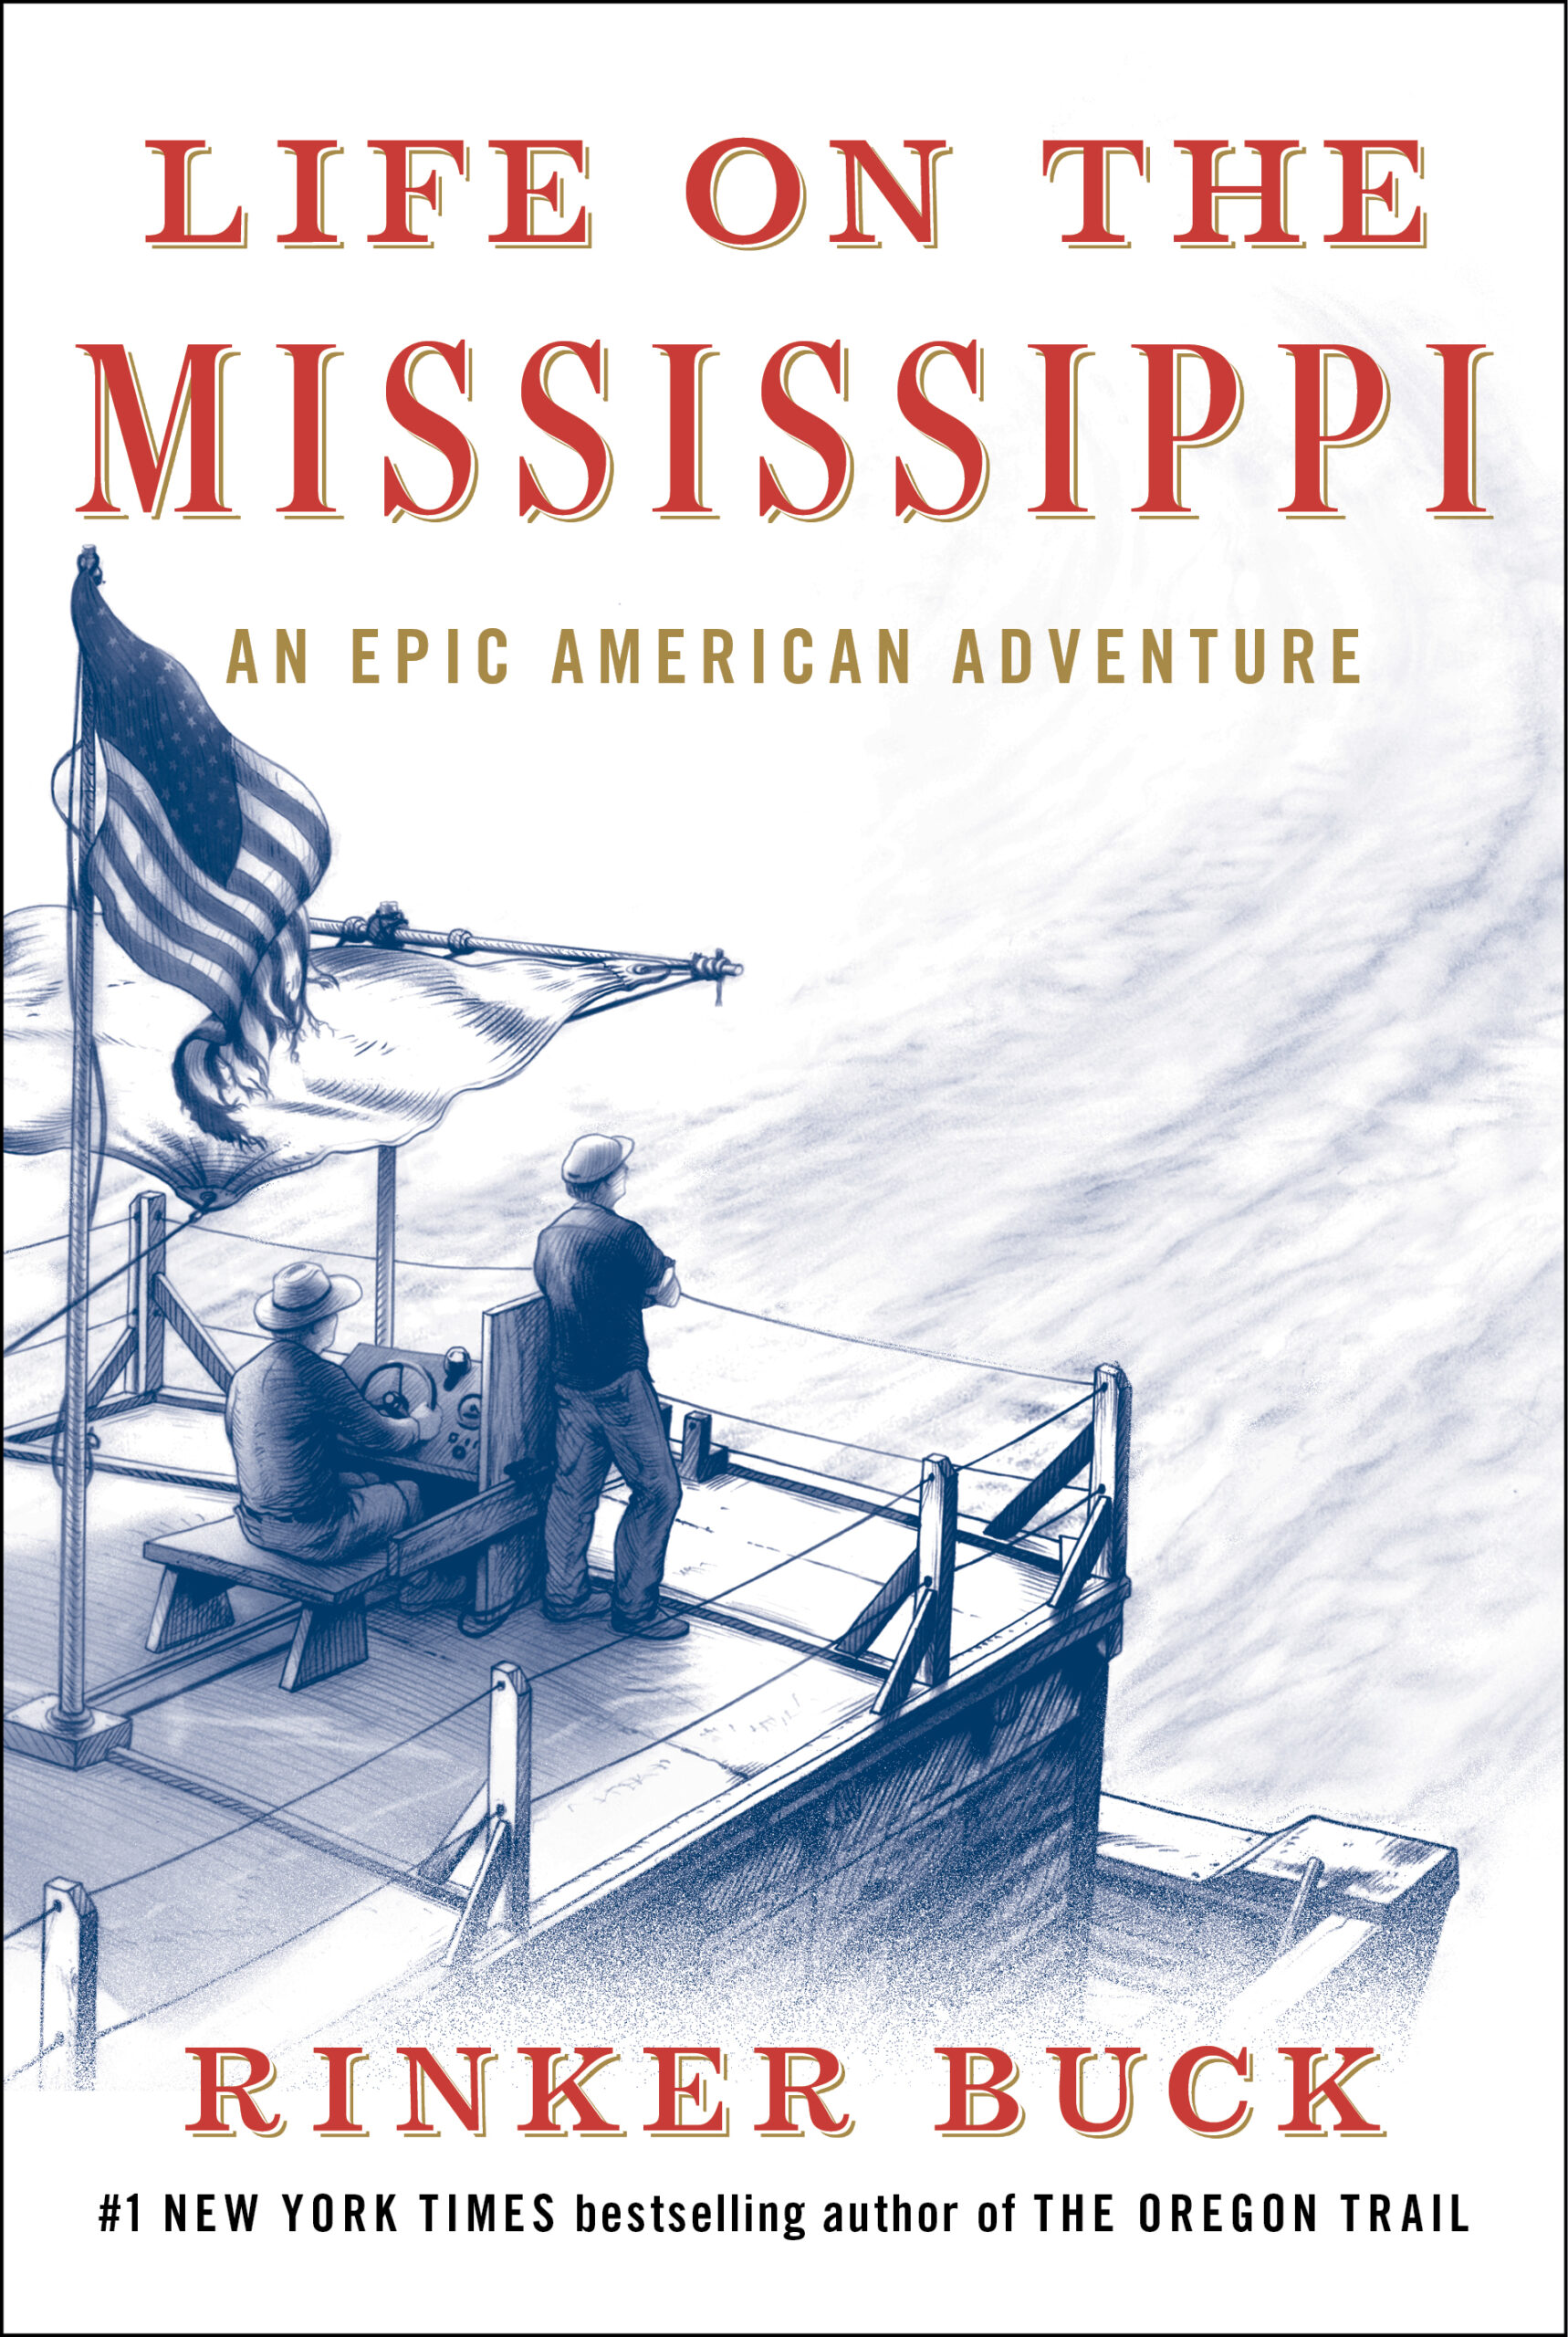 Rinker Buck, "Life on the Mississippi: An Epic American Adventure"